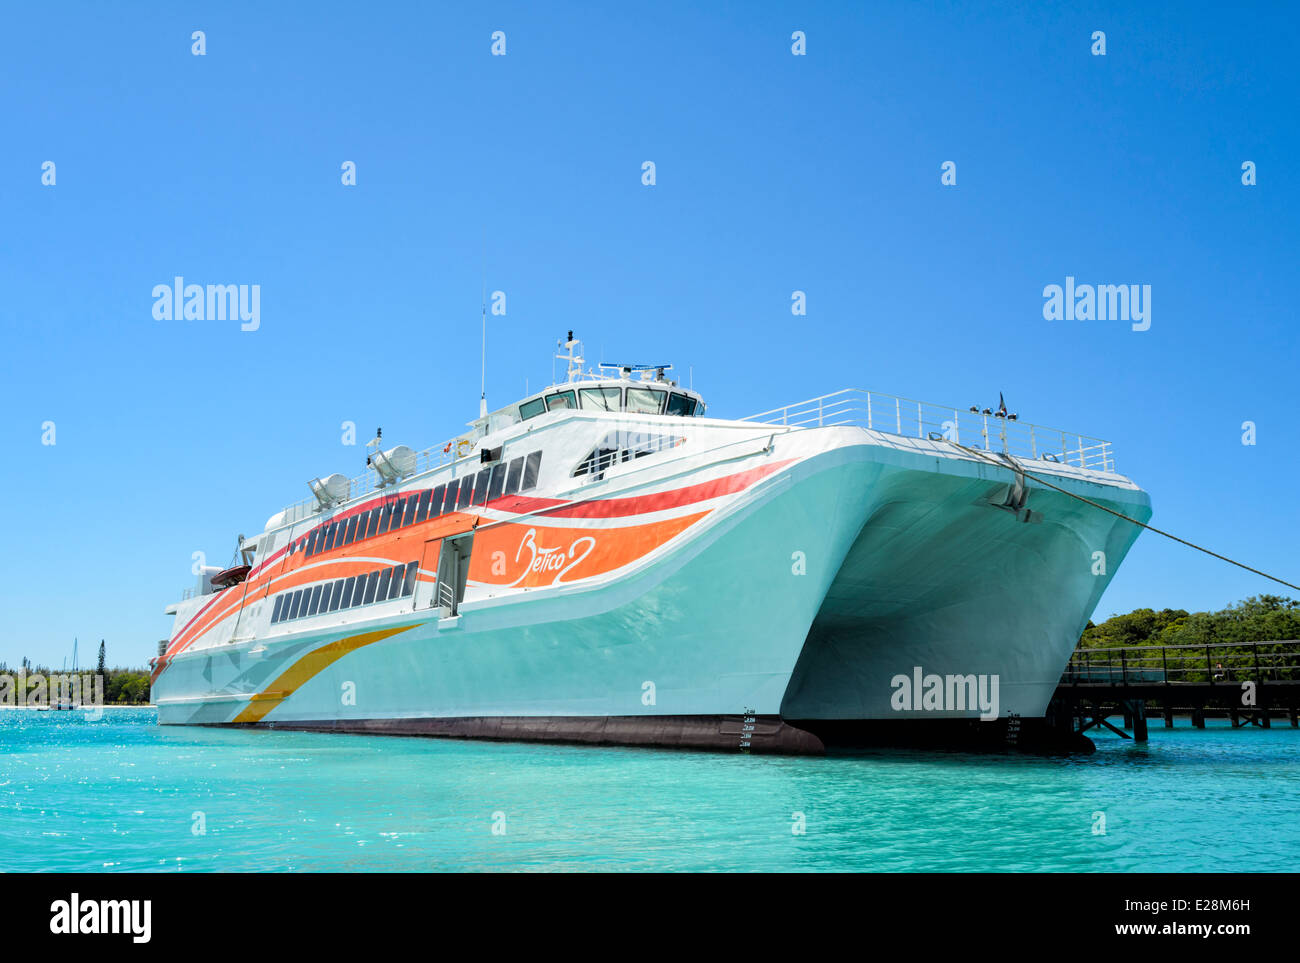 High speed catamaran ocean going passenger and vehicle ferry - please click for more info Stock Photo